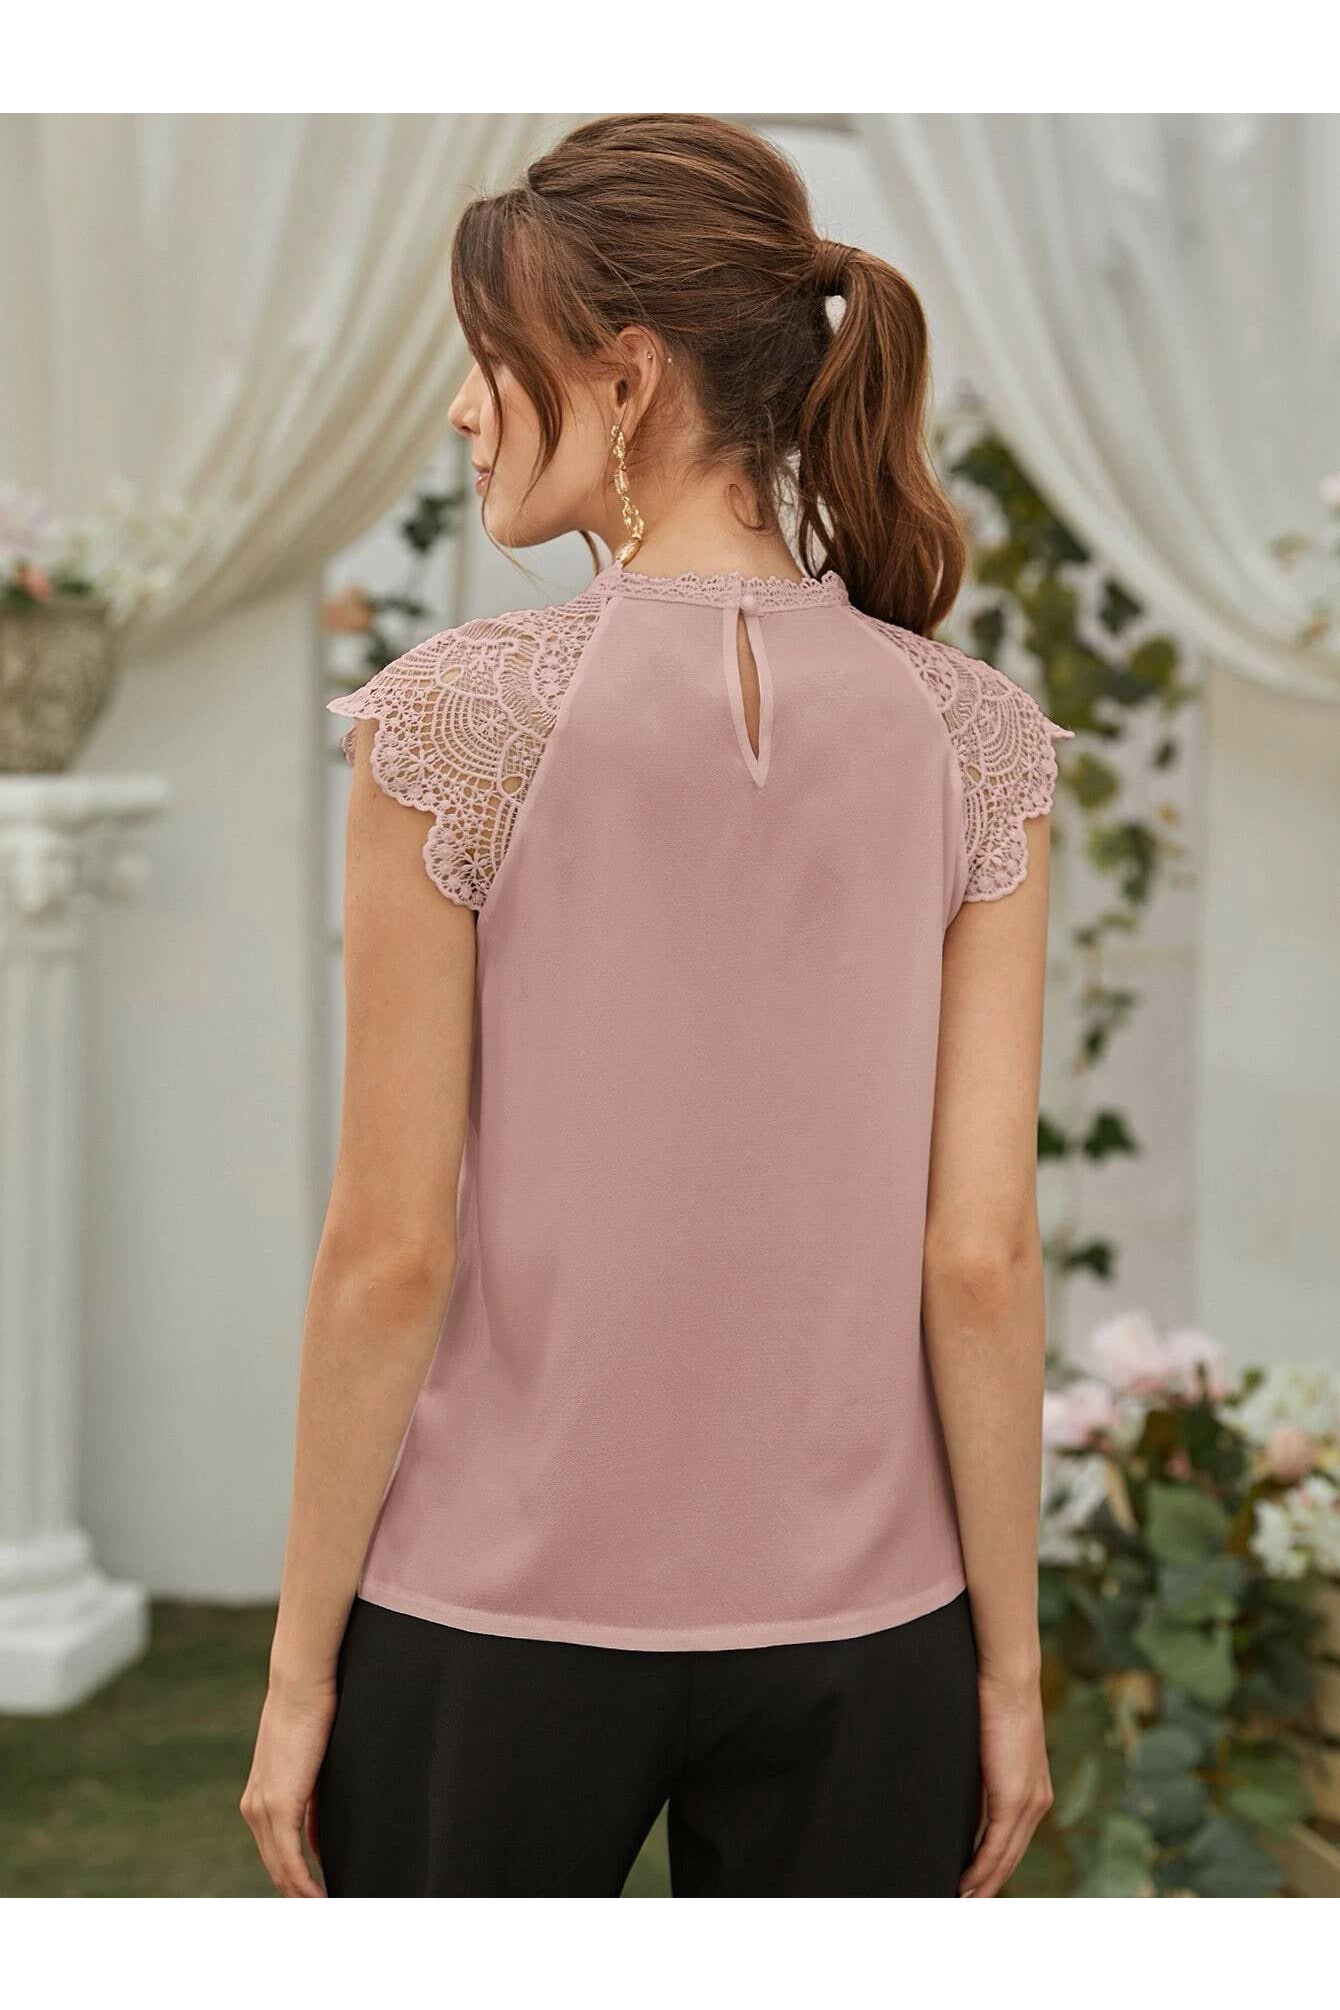 SheIn Women's Elegant Cap Sleeve Keyhole Contrast Lace Blouses Tops Dusty  Pink Small at  Women's Clothing store